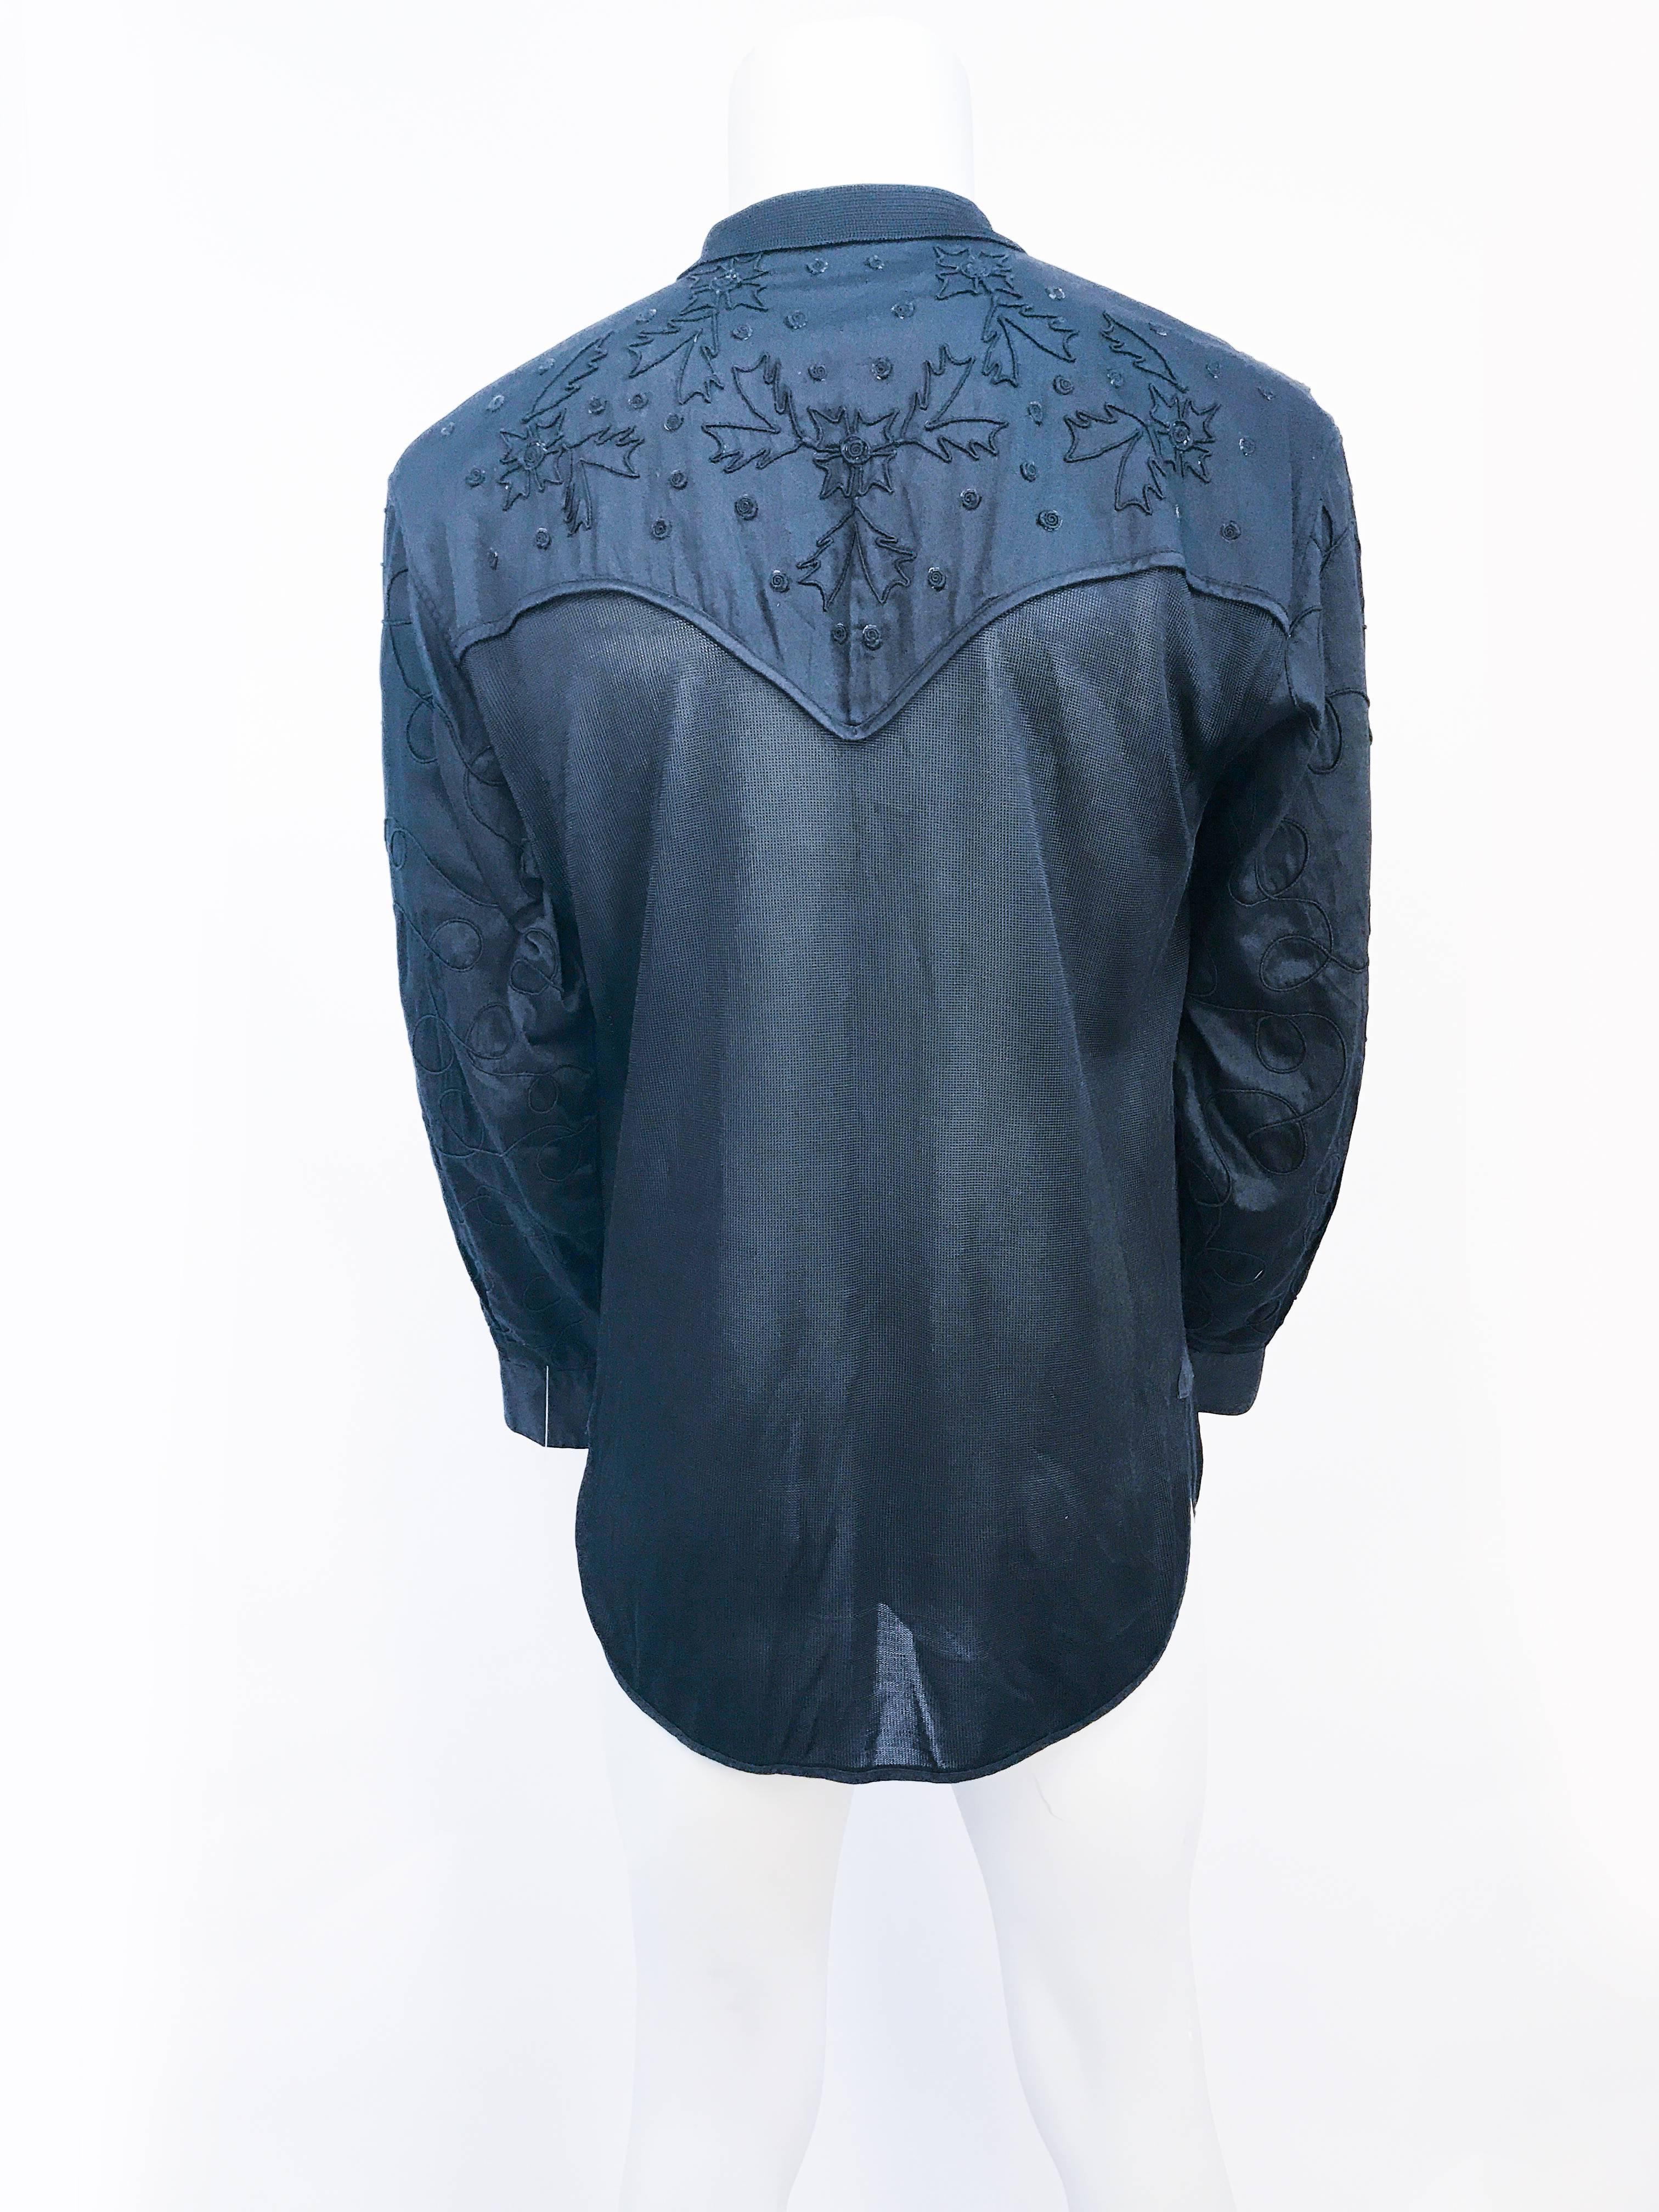 Black 1980s Claude Montana Kintt and Embroidered Western Shirt